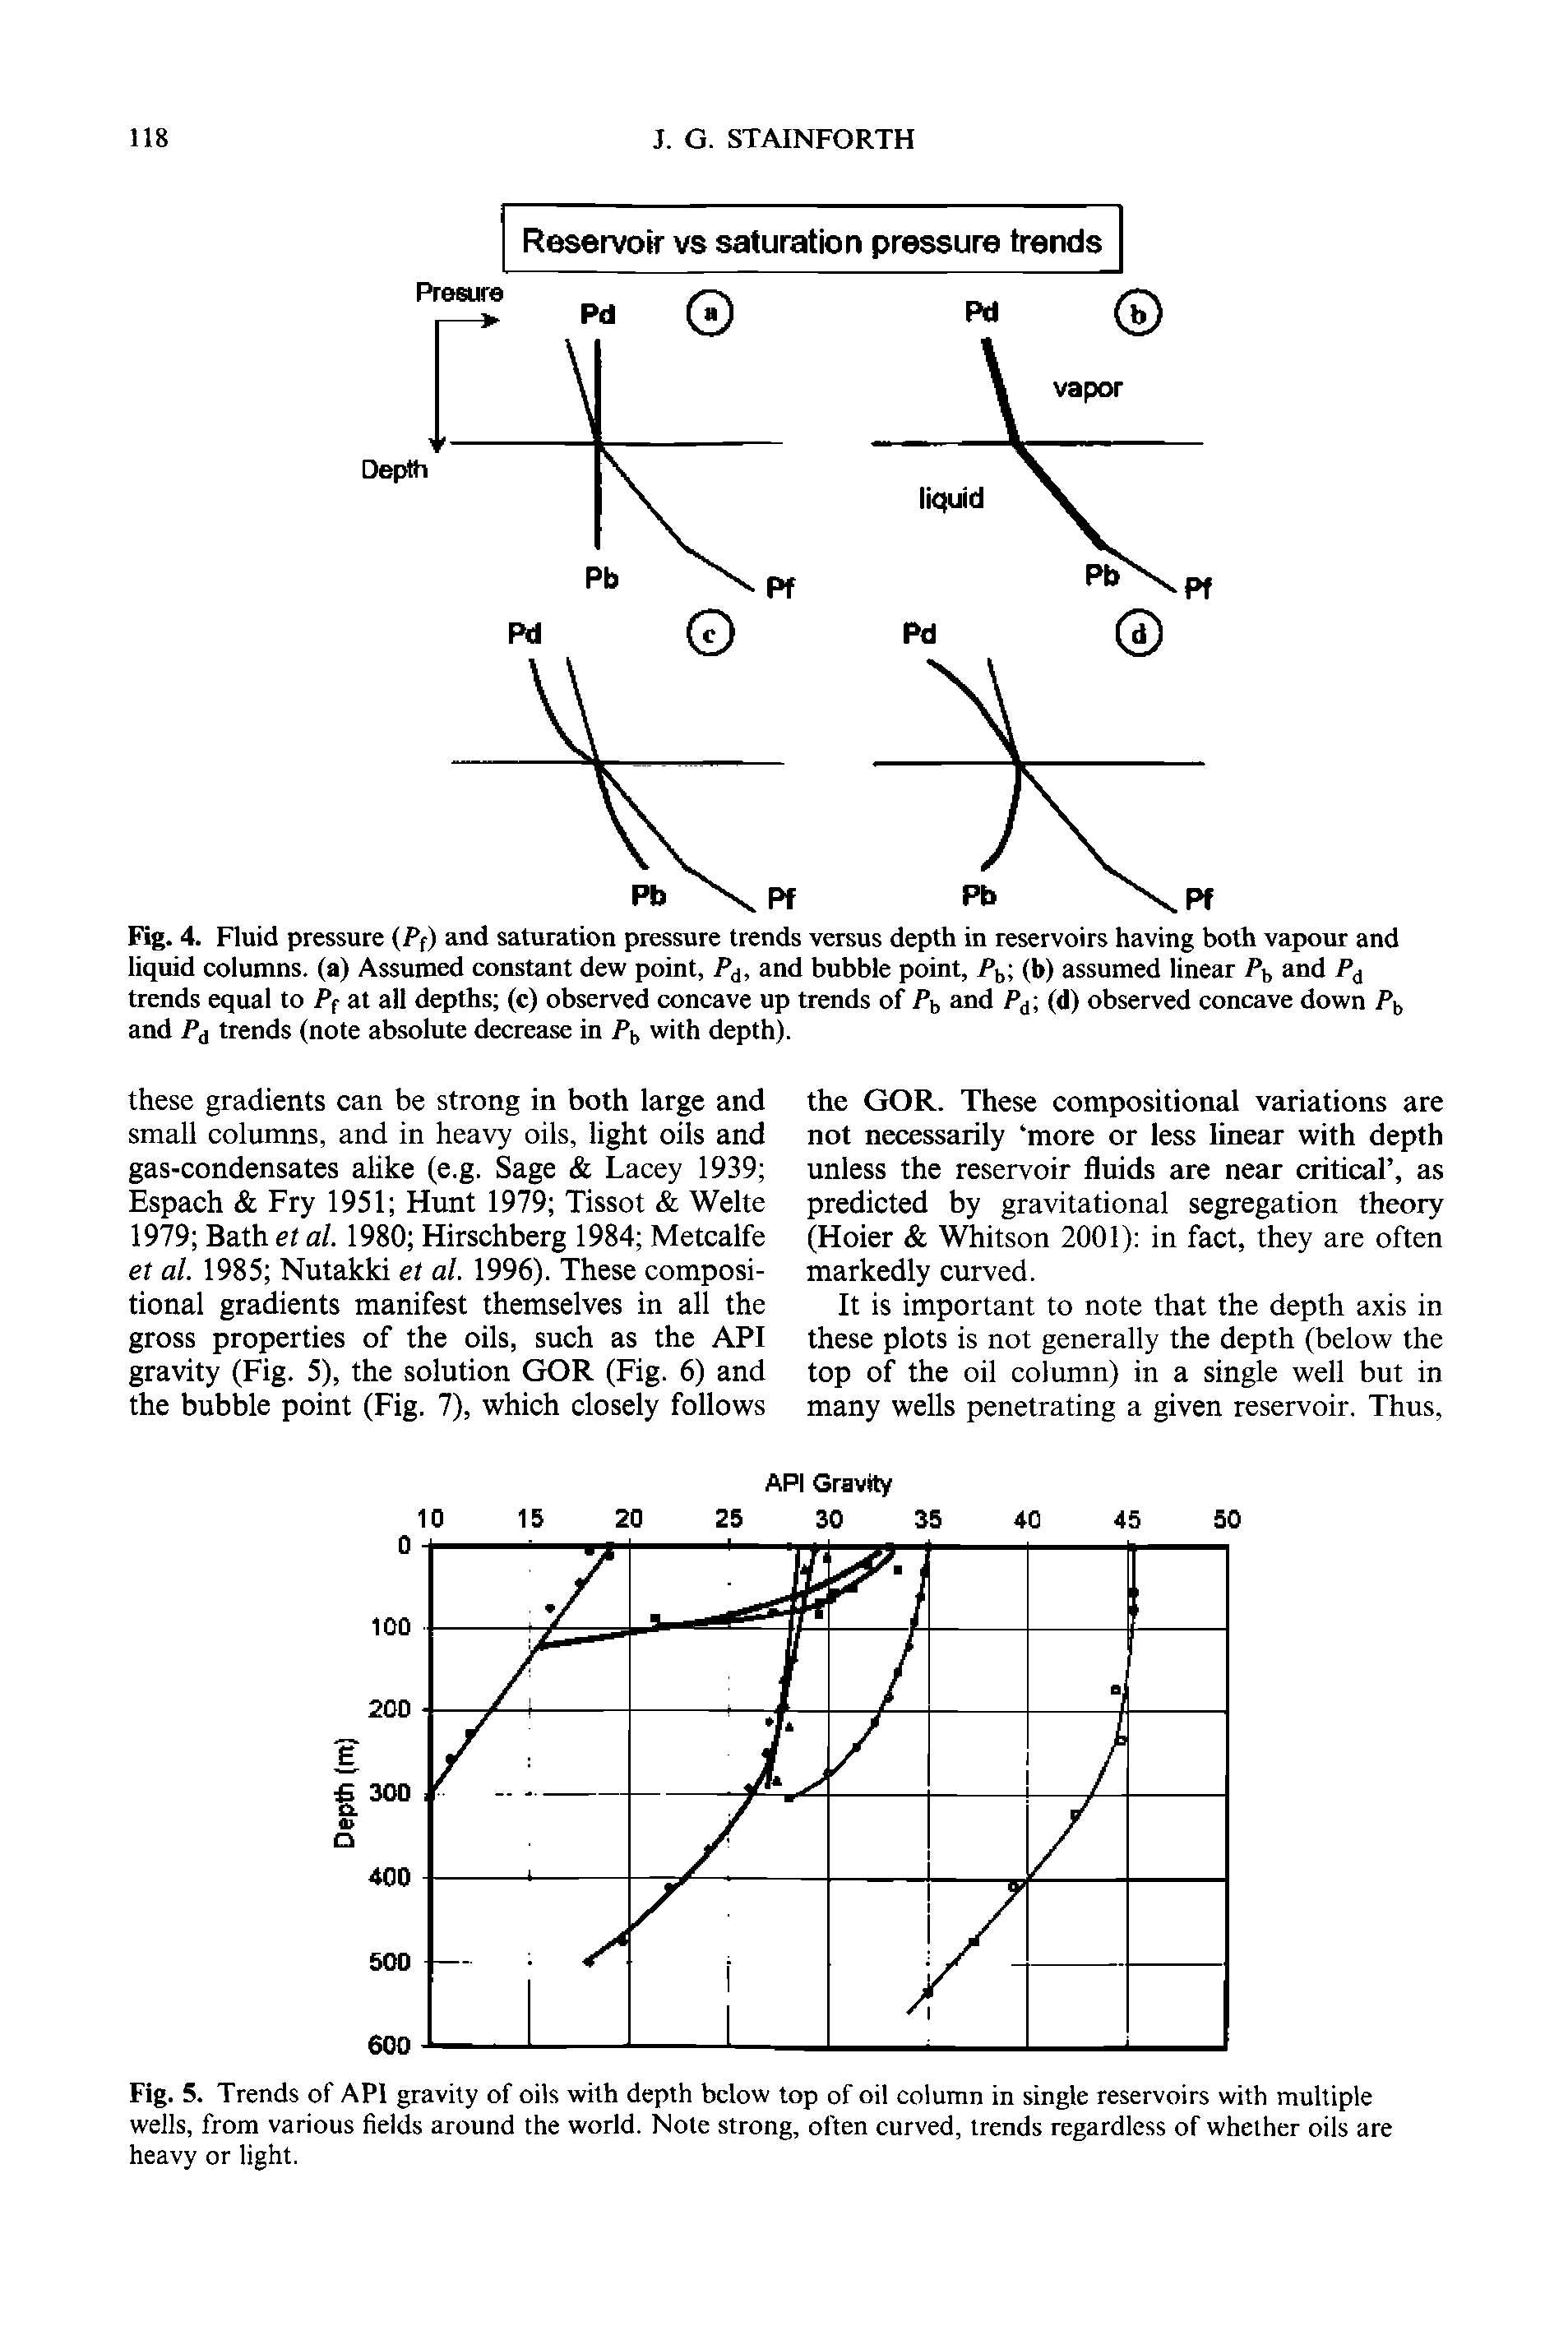 Fig. 4. Fluid pressure (Pf) and saturation pressure trends versus depth in reservoirs having both vapour and liquid columns, (a) Assumed constant dew point, P, and bubble point, Fj, (b) assumed linear Pb and P trends equal to P( at all depths (c) observed concave up trends of P and P (d) observed concave down P and Pj trends (note absolute decrease in Pb with depth).